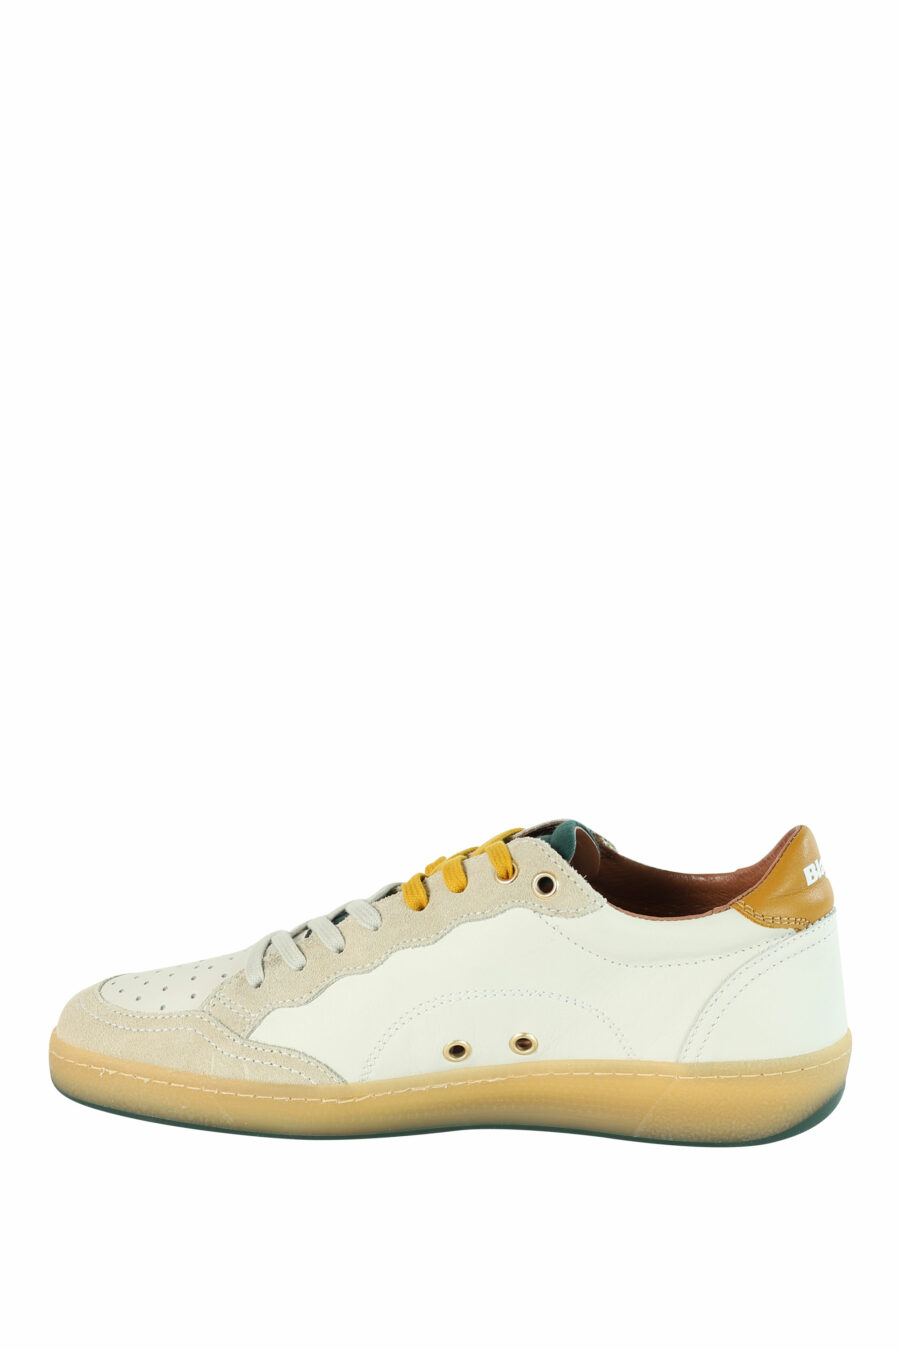 White "MURRAY" trainers with green and yellow details - 8058156497566 3